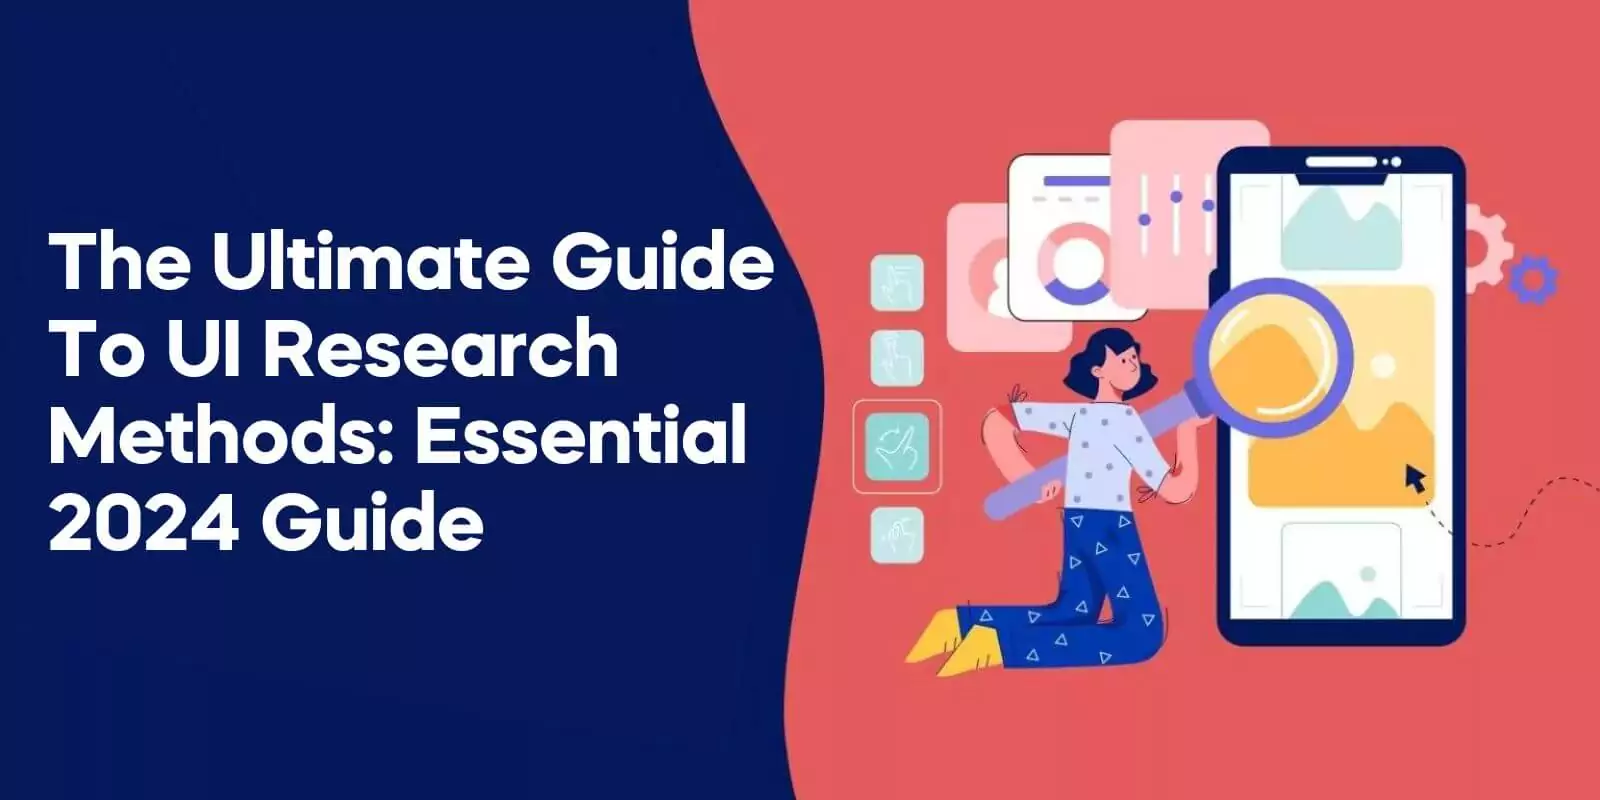 The Ultimate Guide to UI Research Methods Essential 2024 Guide